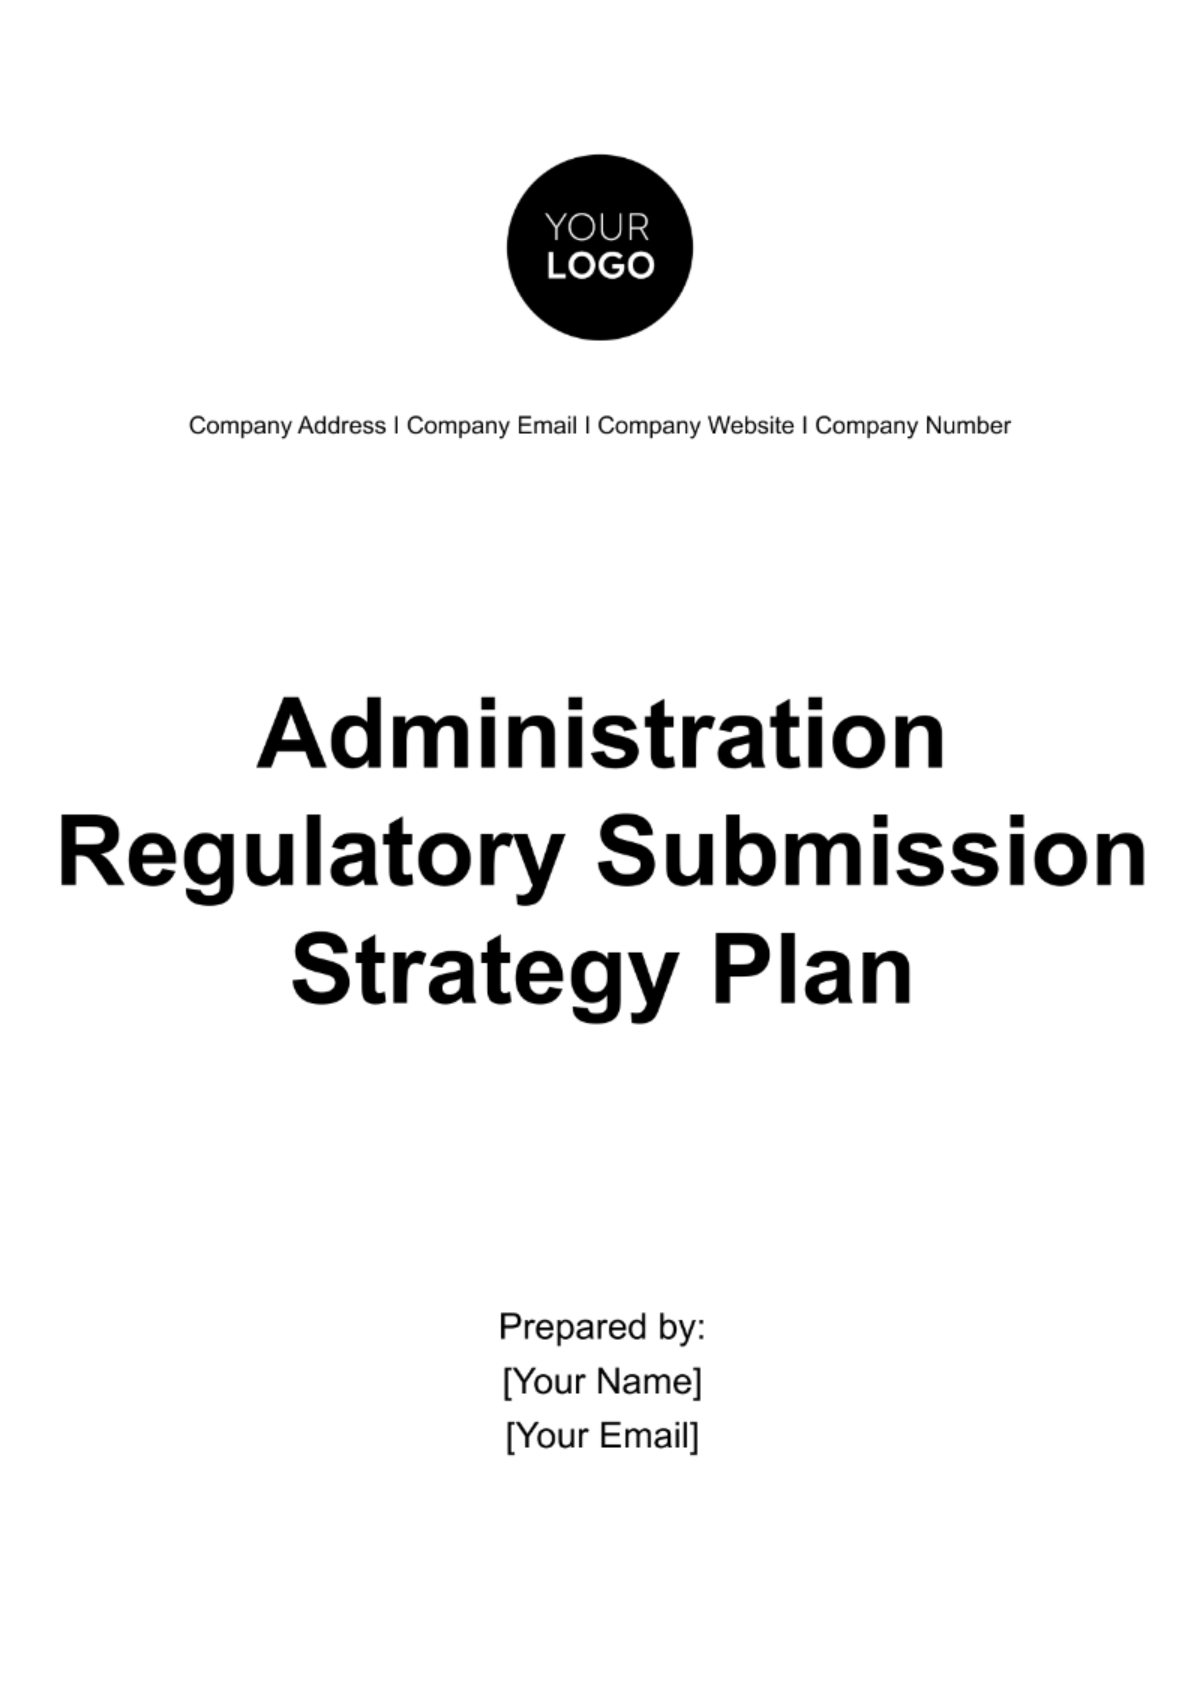 Administration Regulatory Submission Strategy Plan Template